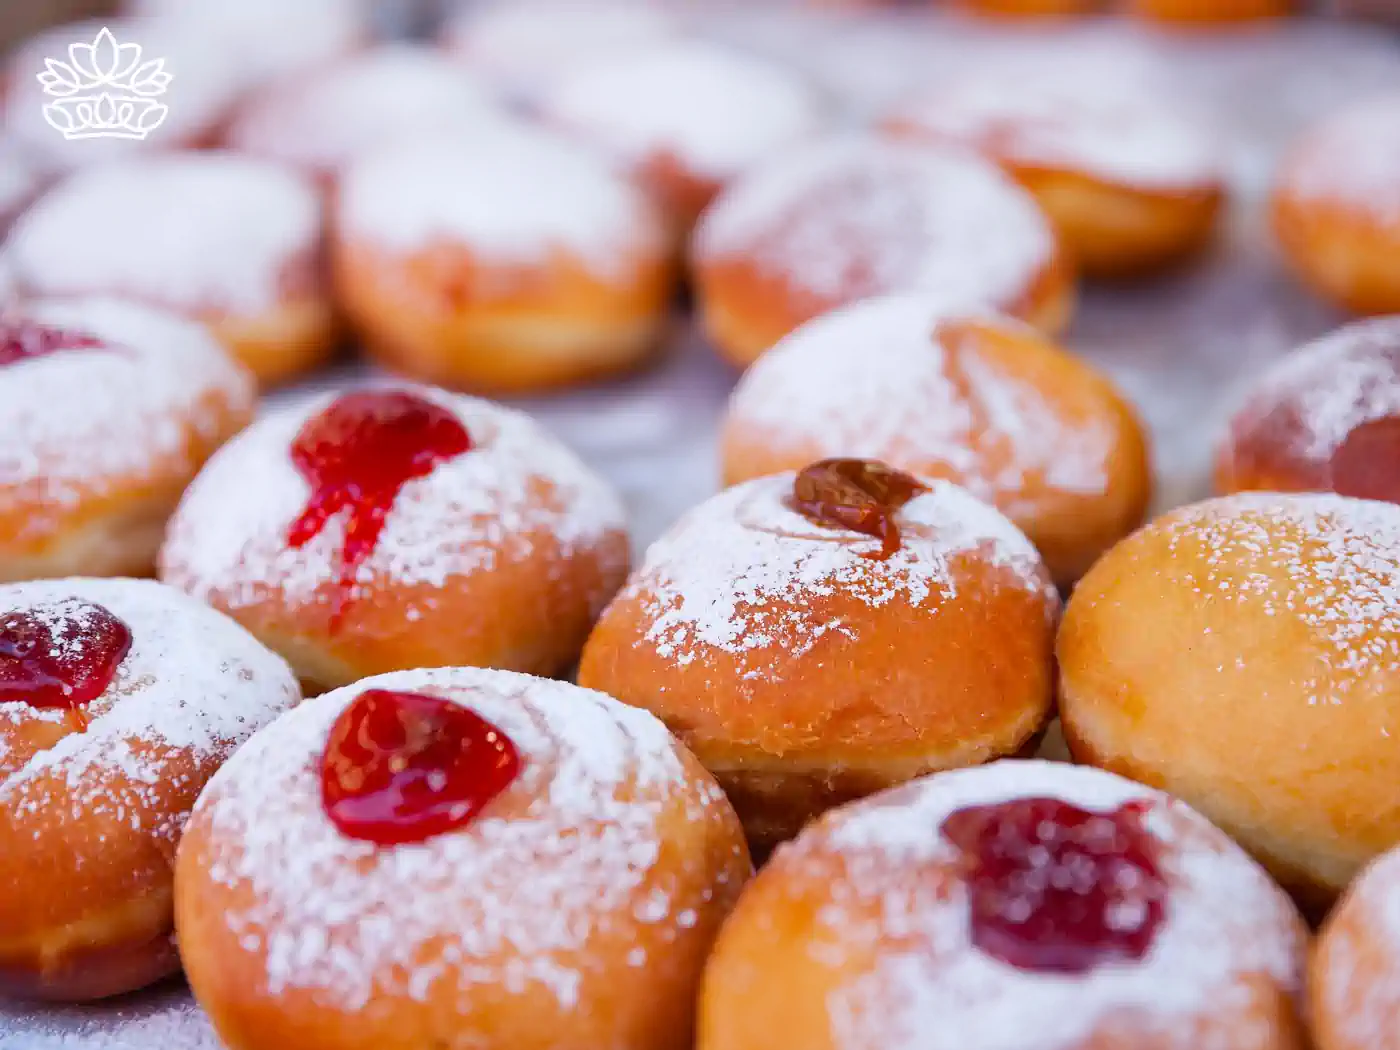 A tray of traditional Hanukkah jelly doughnuts (sufganiyot) topped with powdered sugar and red jam filling. Fabulous Flowers and Gifts - Hanukkah Flowers.